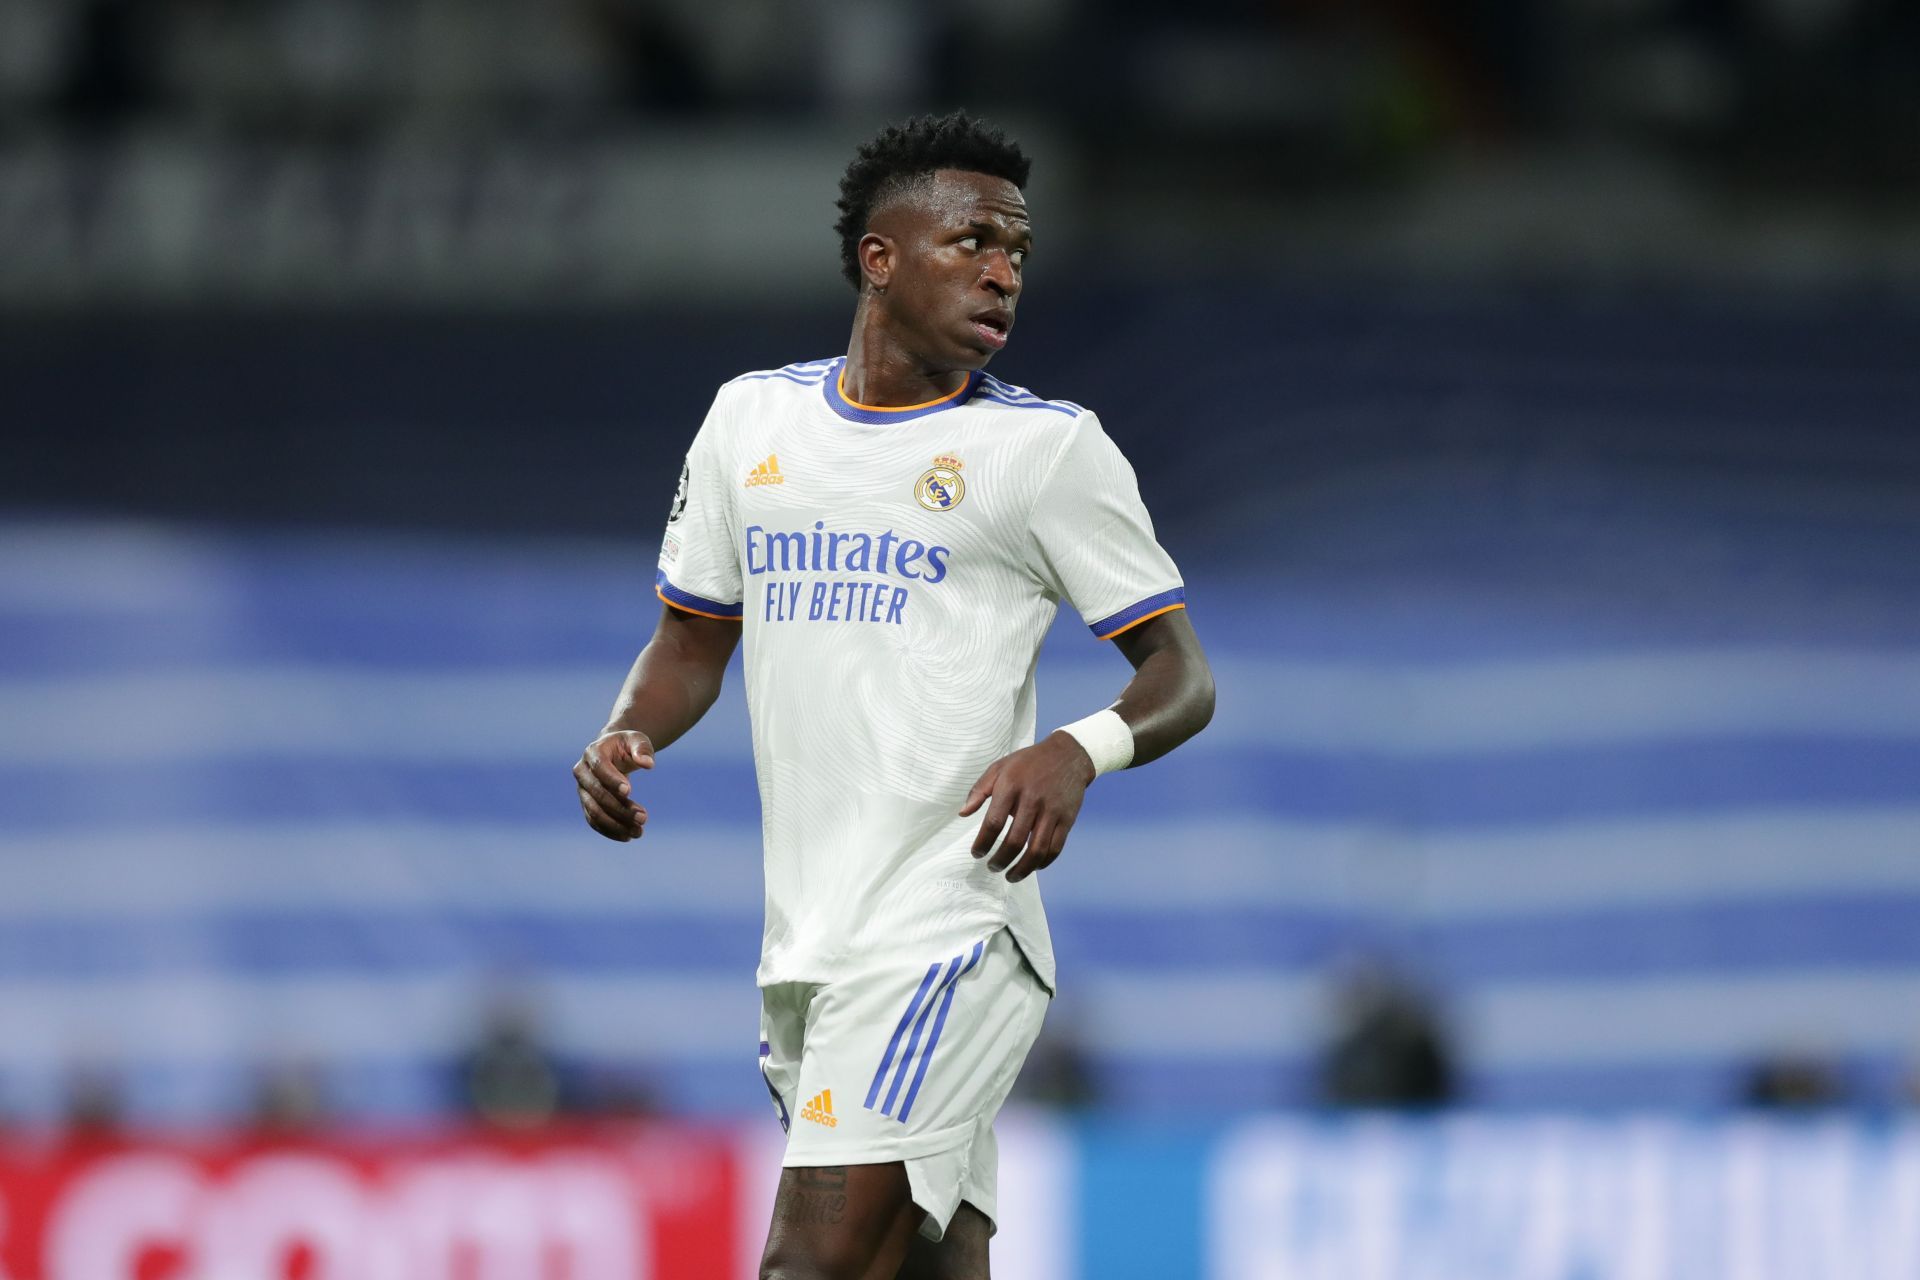 Manchester United are preparing an improved offer for Vinicius Junior.